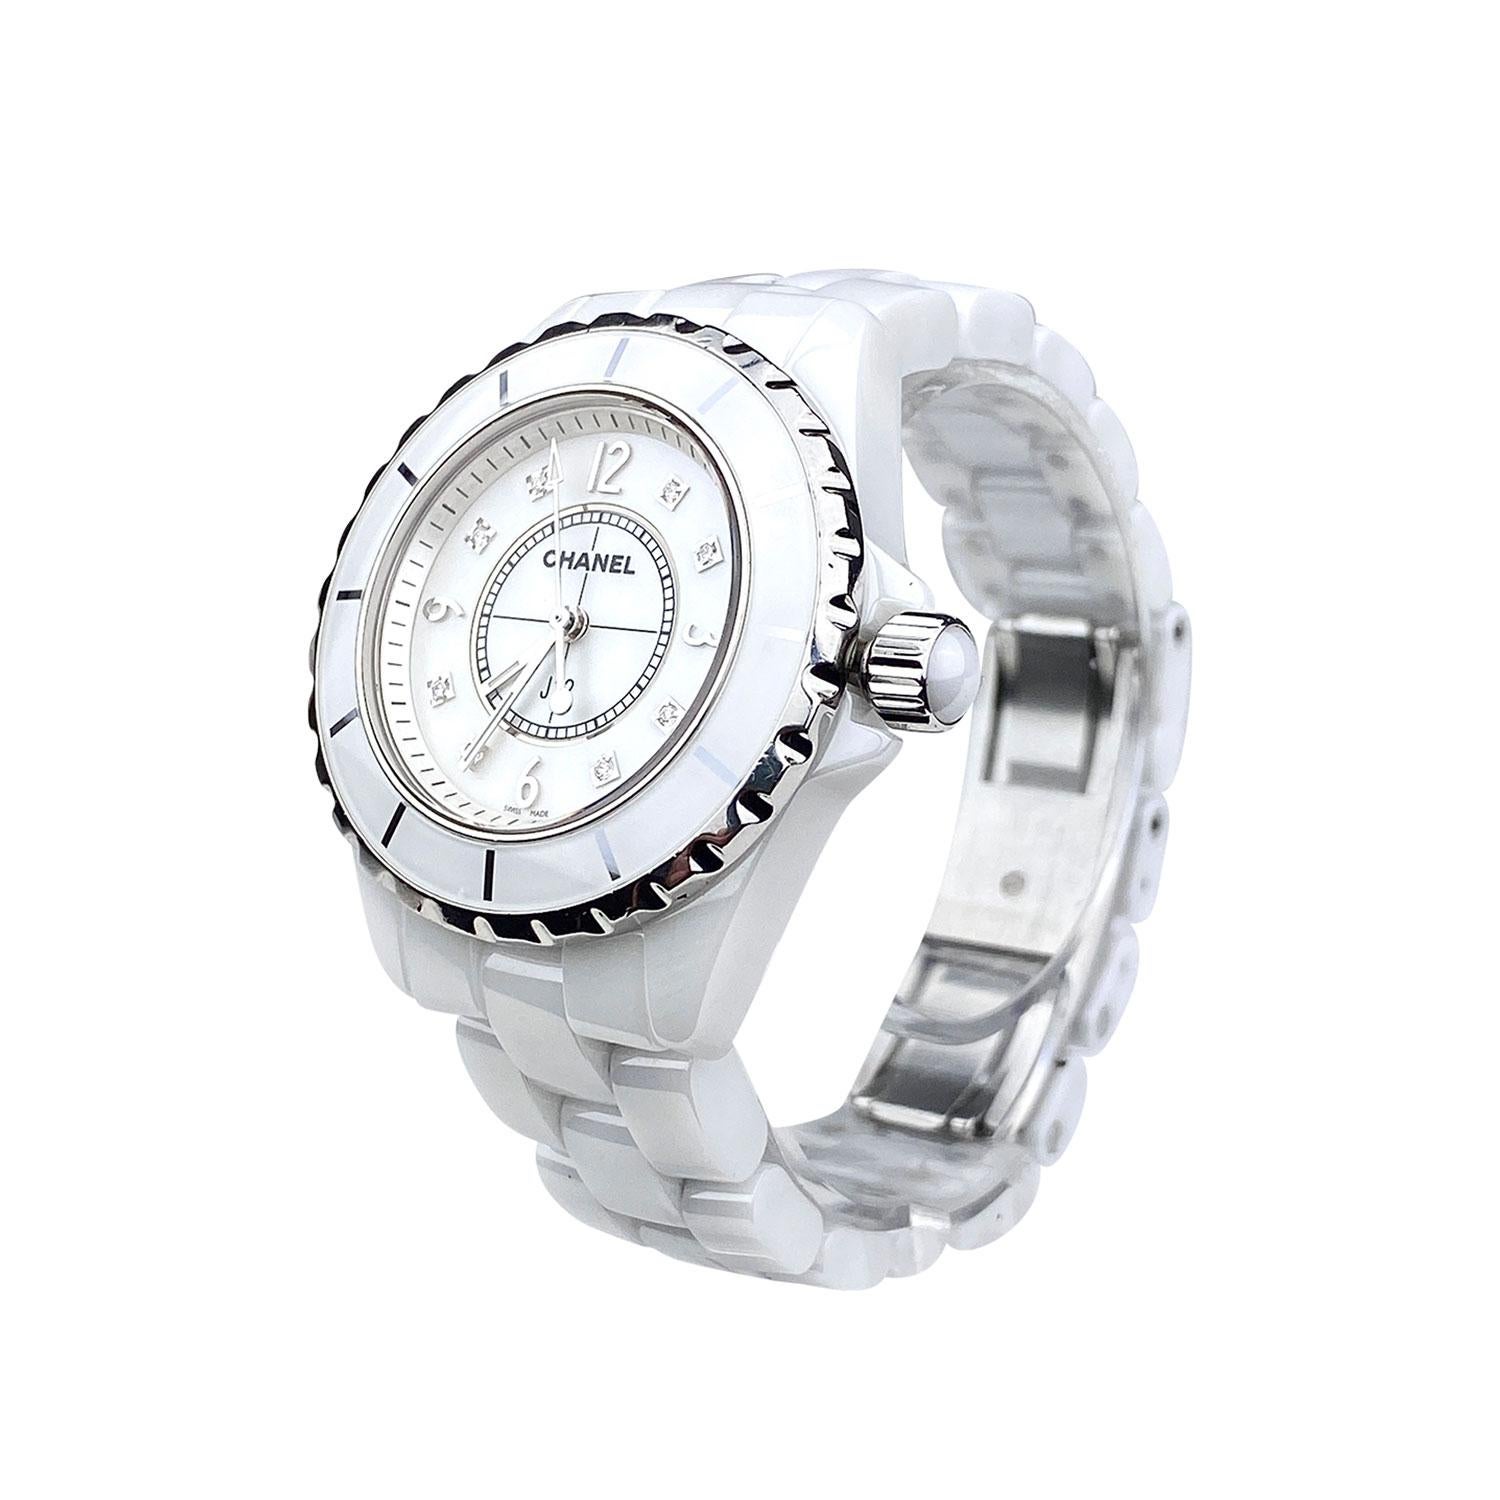 White ceramic and stainless steel 29mm Chanel J12 watch featuring a

- High precision quartz movement
- White highly resistant ceramic bracelet and steel triple-folding buckle
- Steel screw-down crown with white highly resistant ceramic